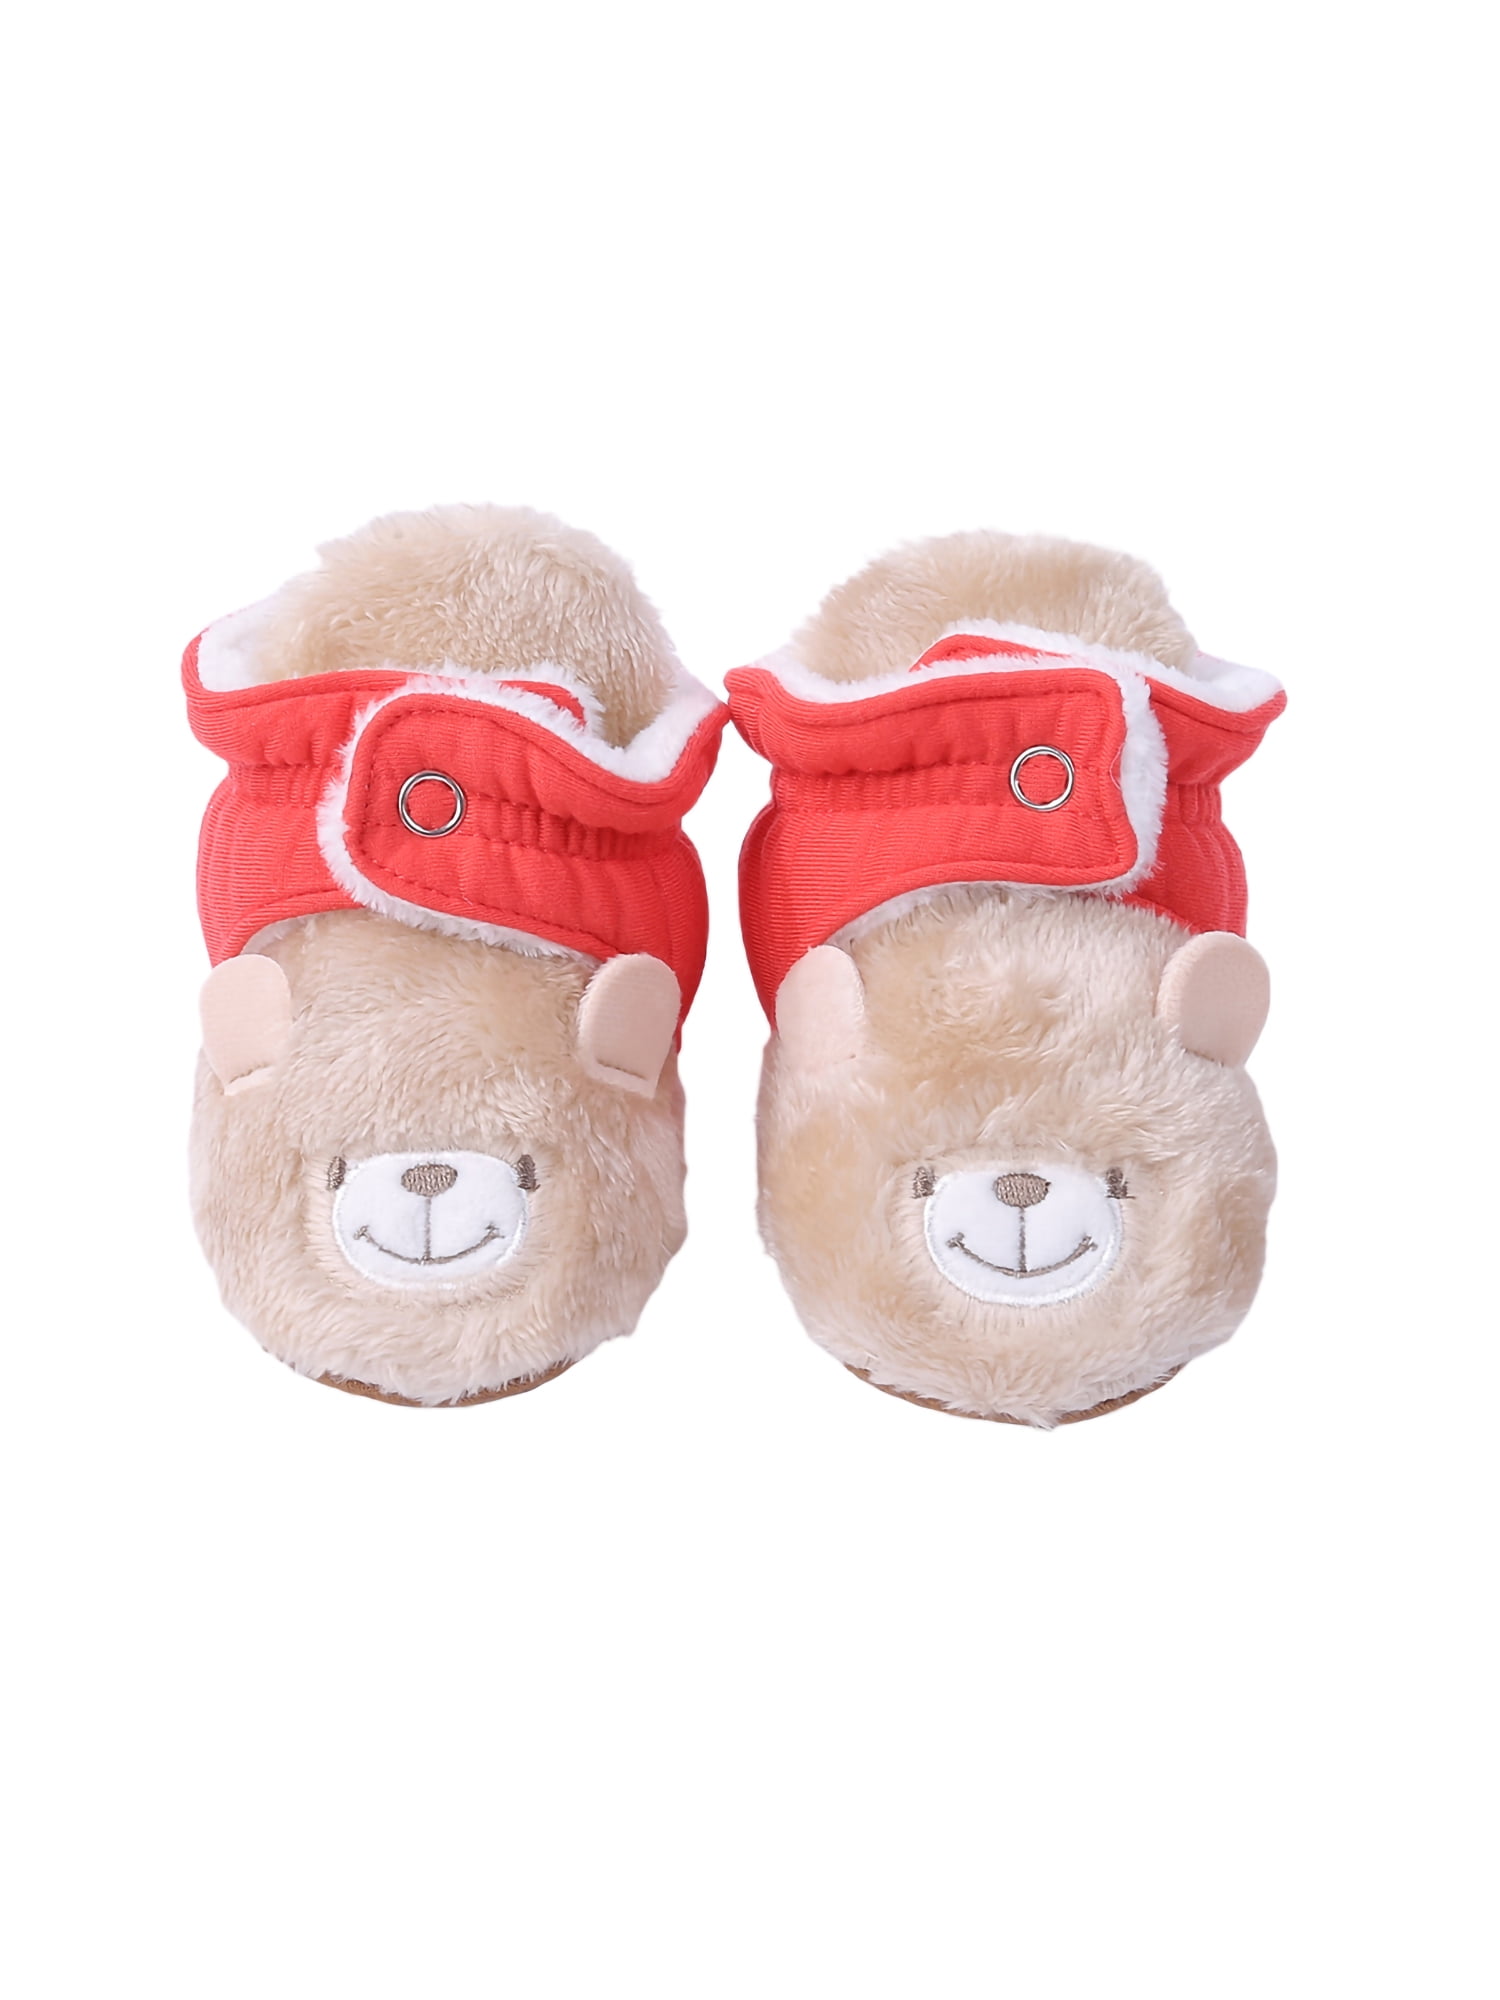 OutTop Baby Booties Cute Graphic Print Fleece Sock Shoes Fall Winter Warm Non Slip Floor Slippers for Infant Boys Girls